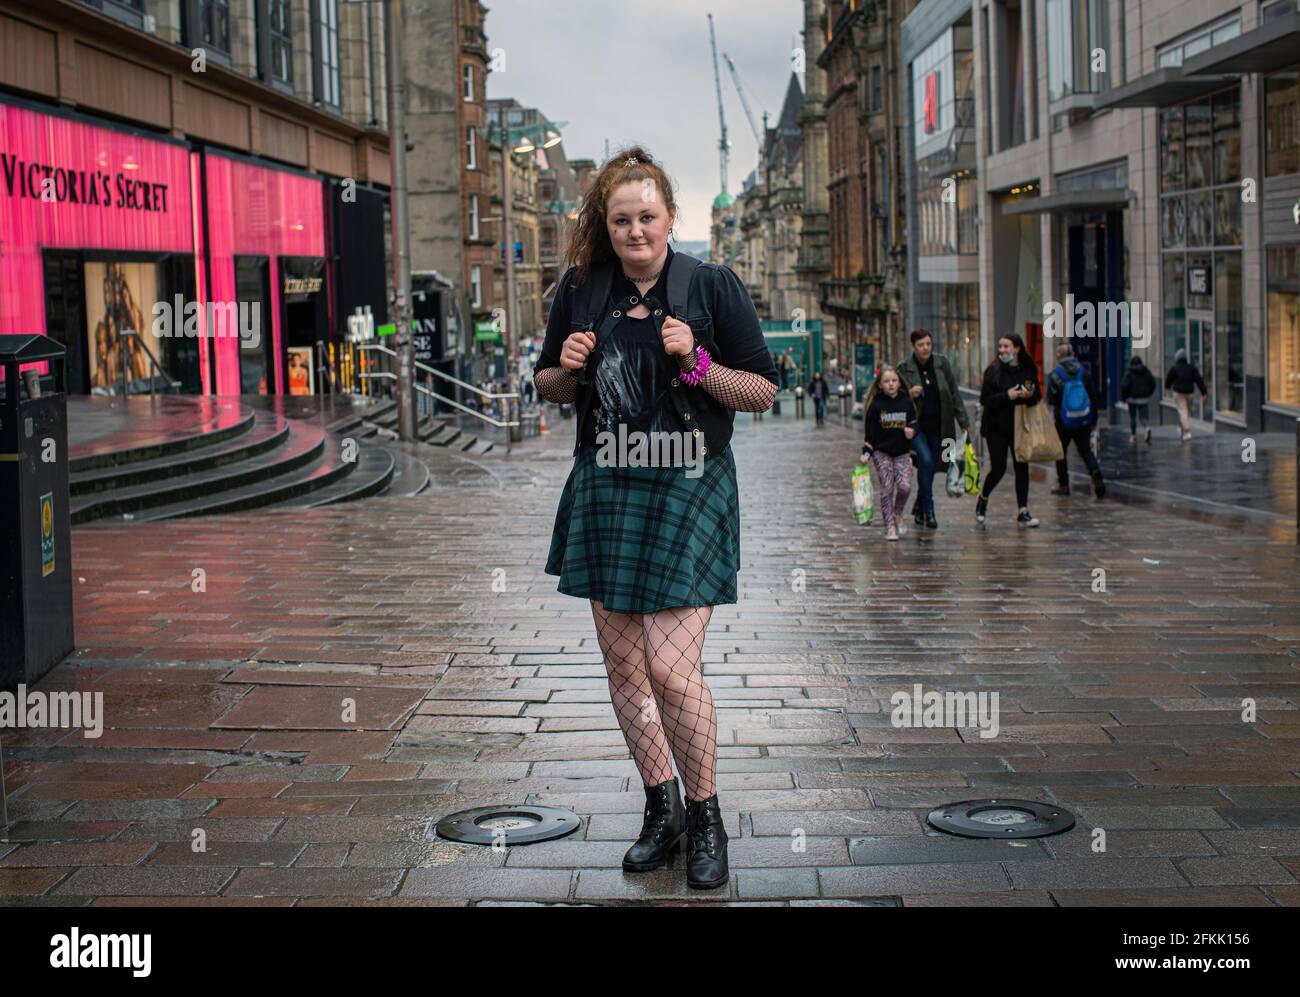 Potrait of young woman wearing a tartan skirt  and net stockings in empty shopping street  in Buchan Street  central Glasgow, Scotland, UK Stock Photo